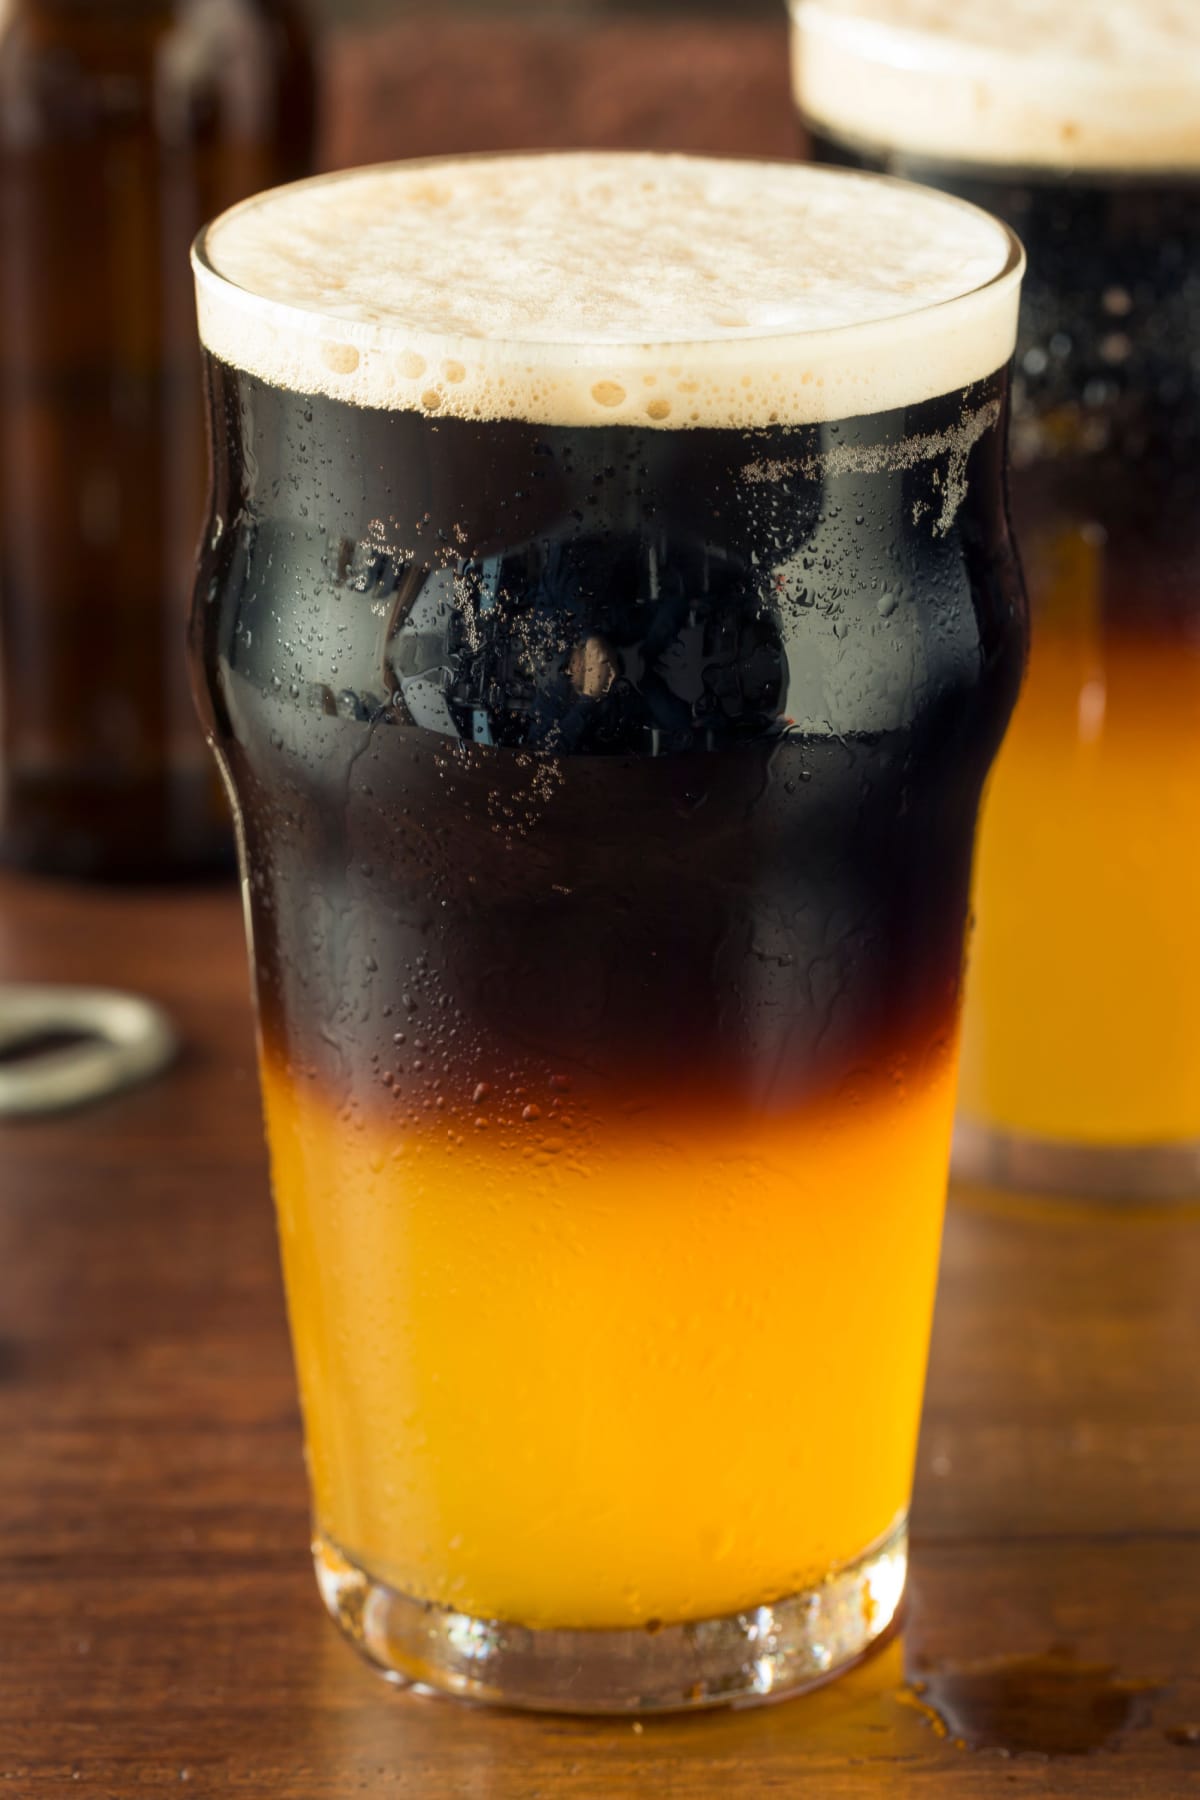 Irish half and half cocktail with pale colored ale on bottom and black beer on top.